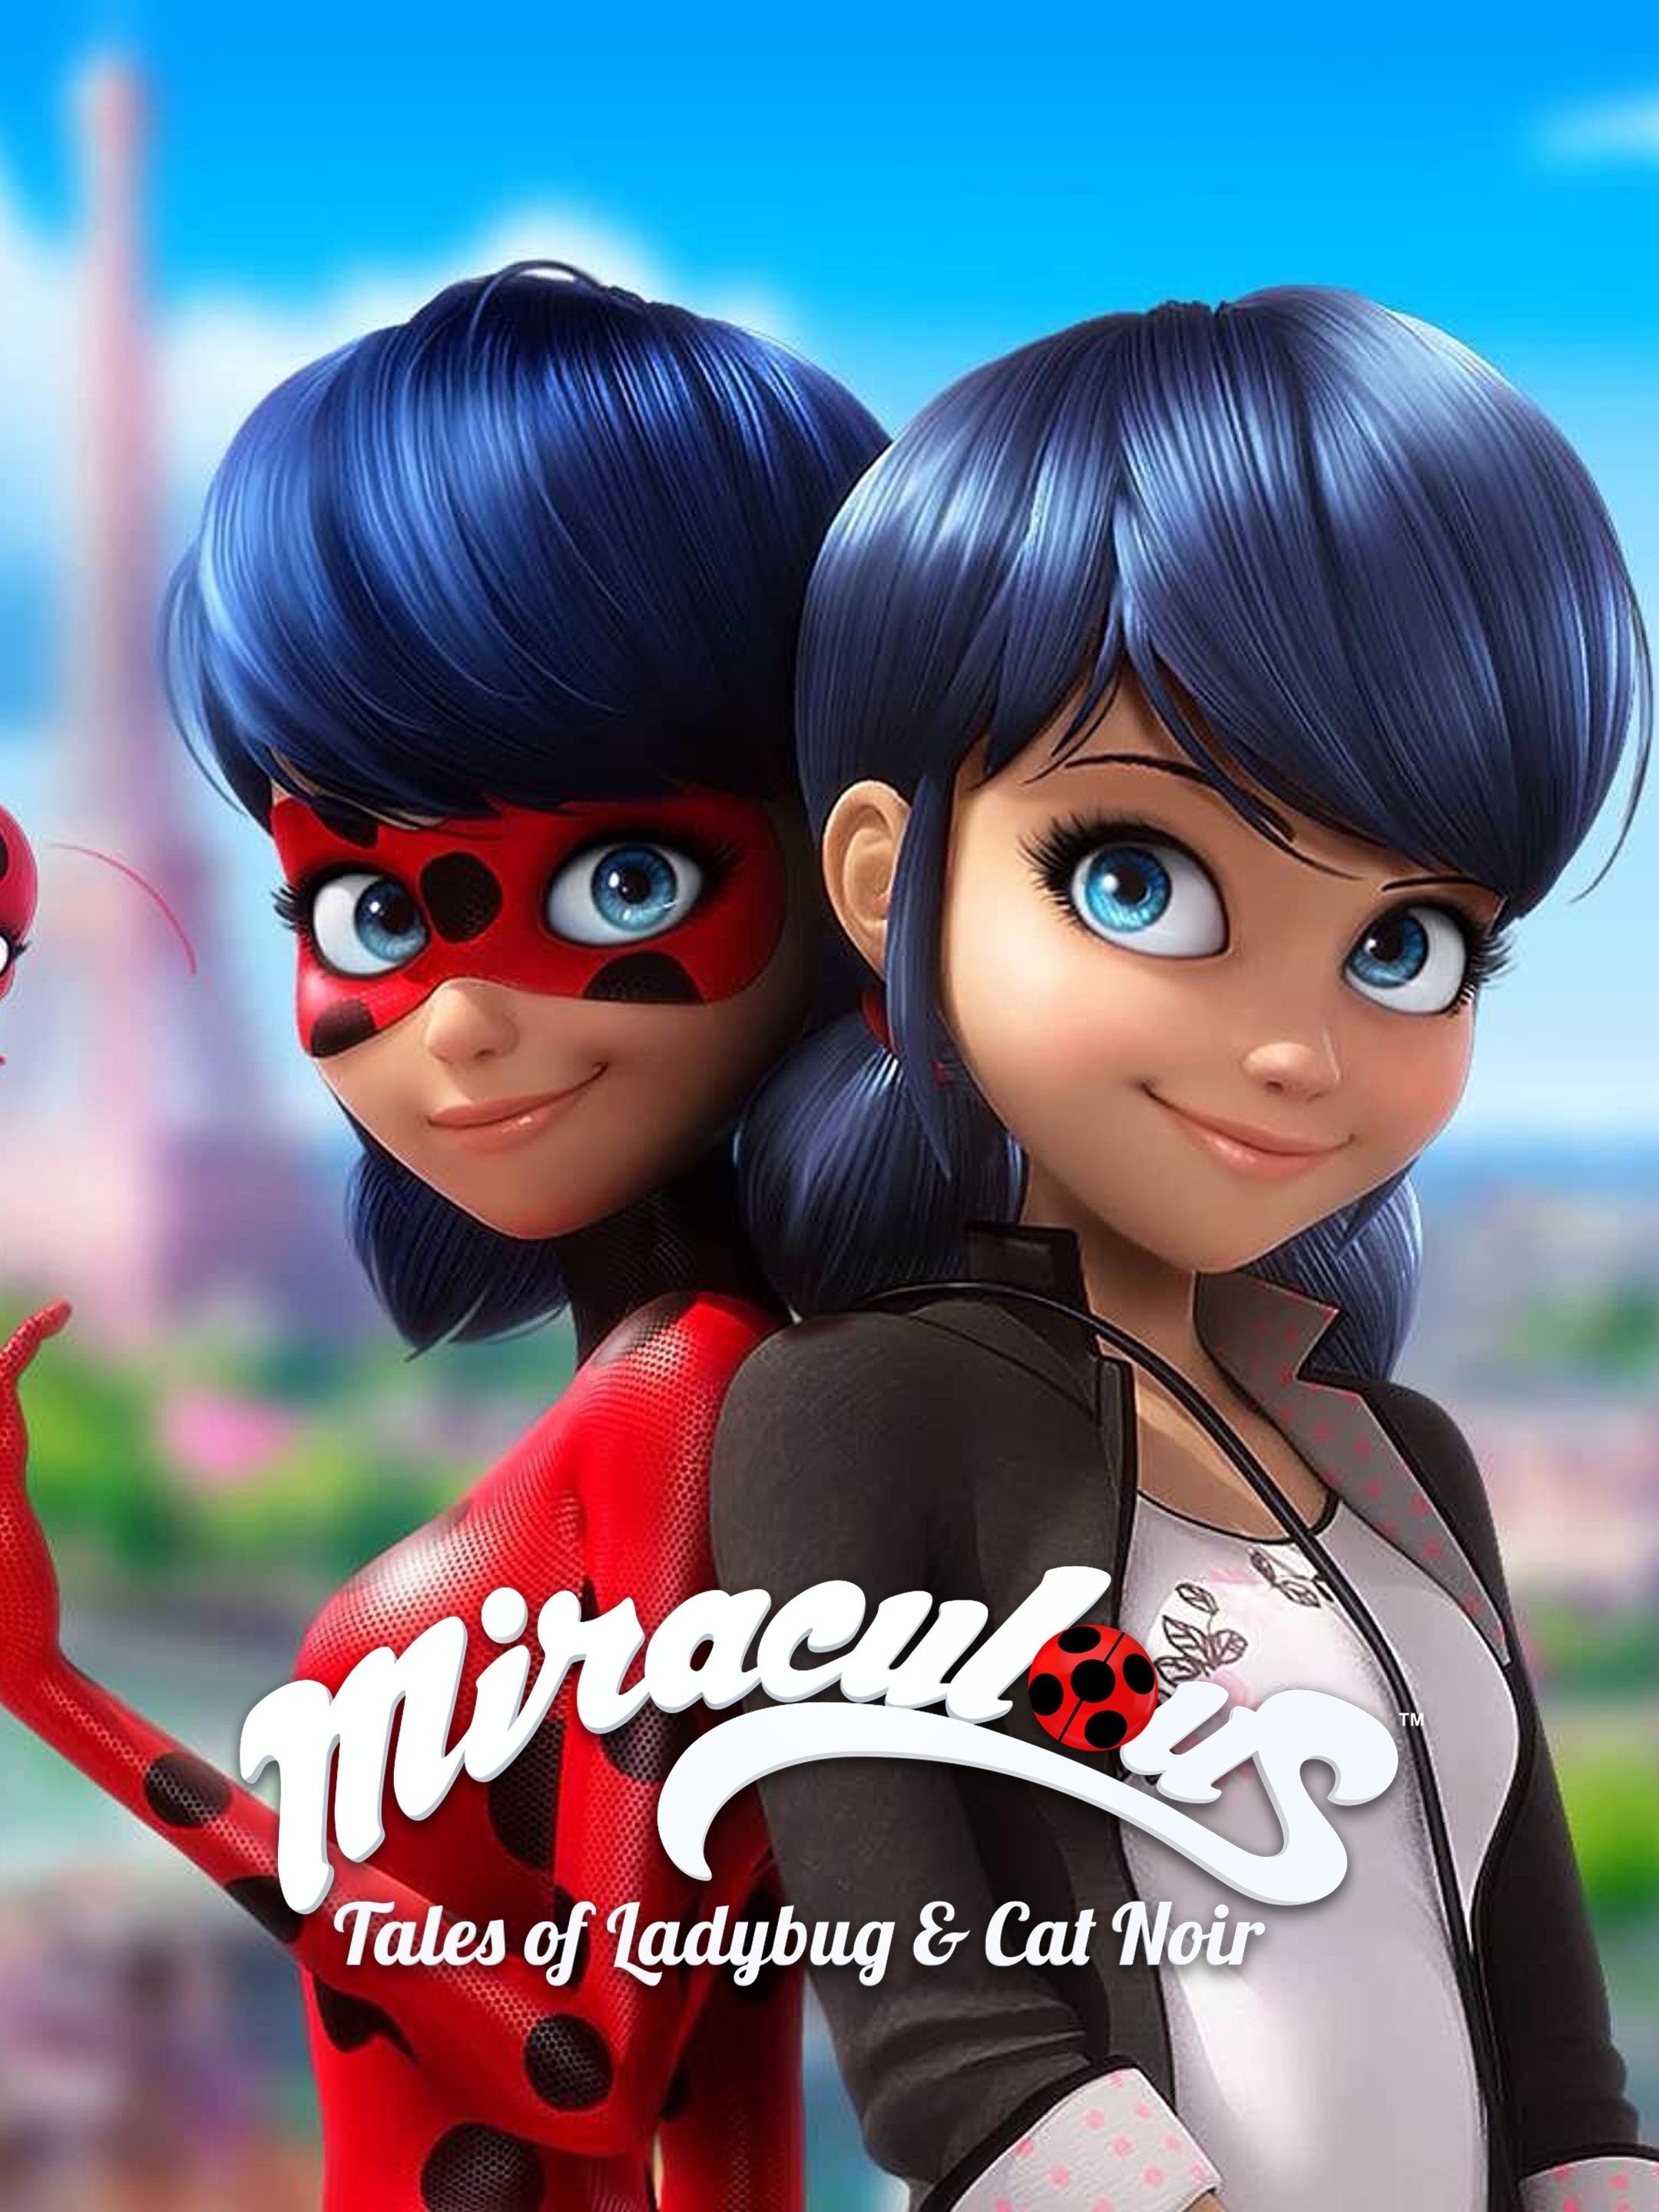 corey bergen recommends images of ladybug from miraculous pic